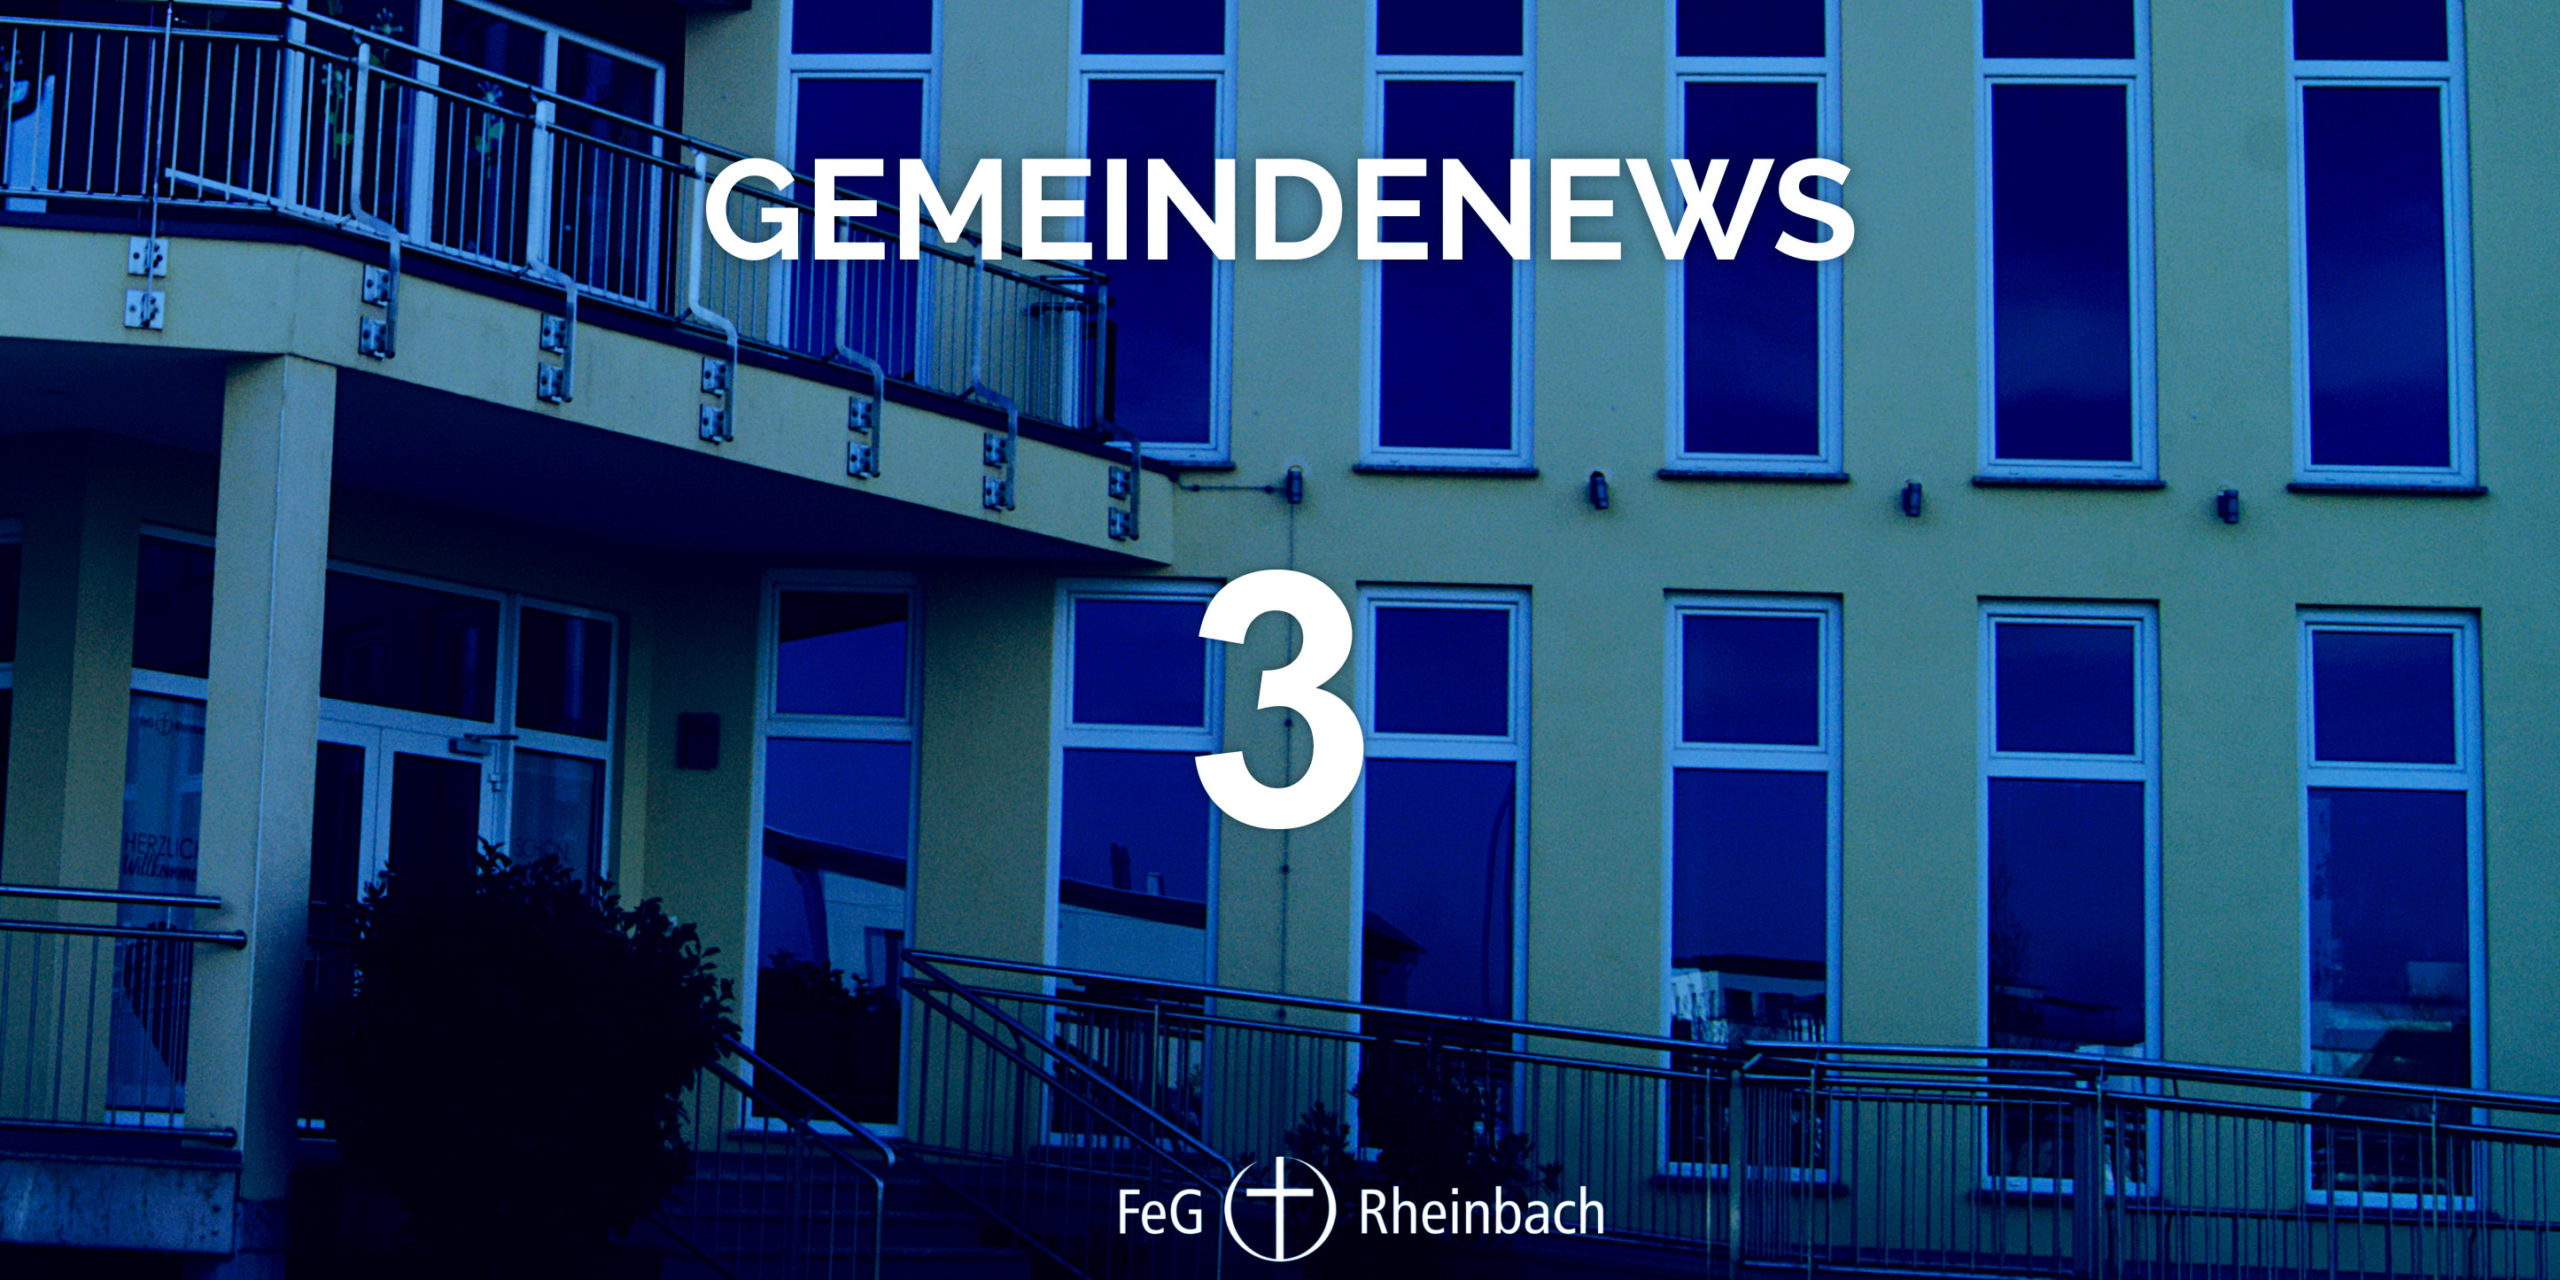 You are currently viewing Gemeindenews 3